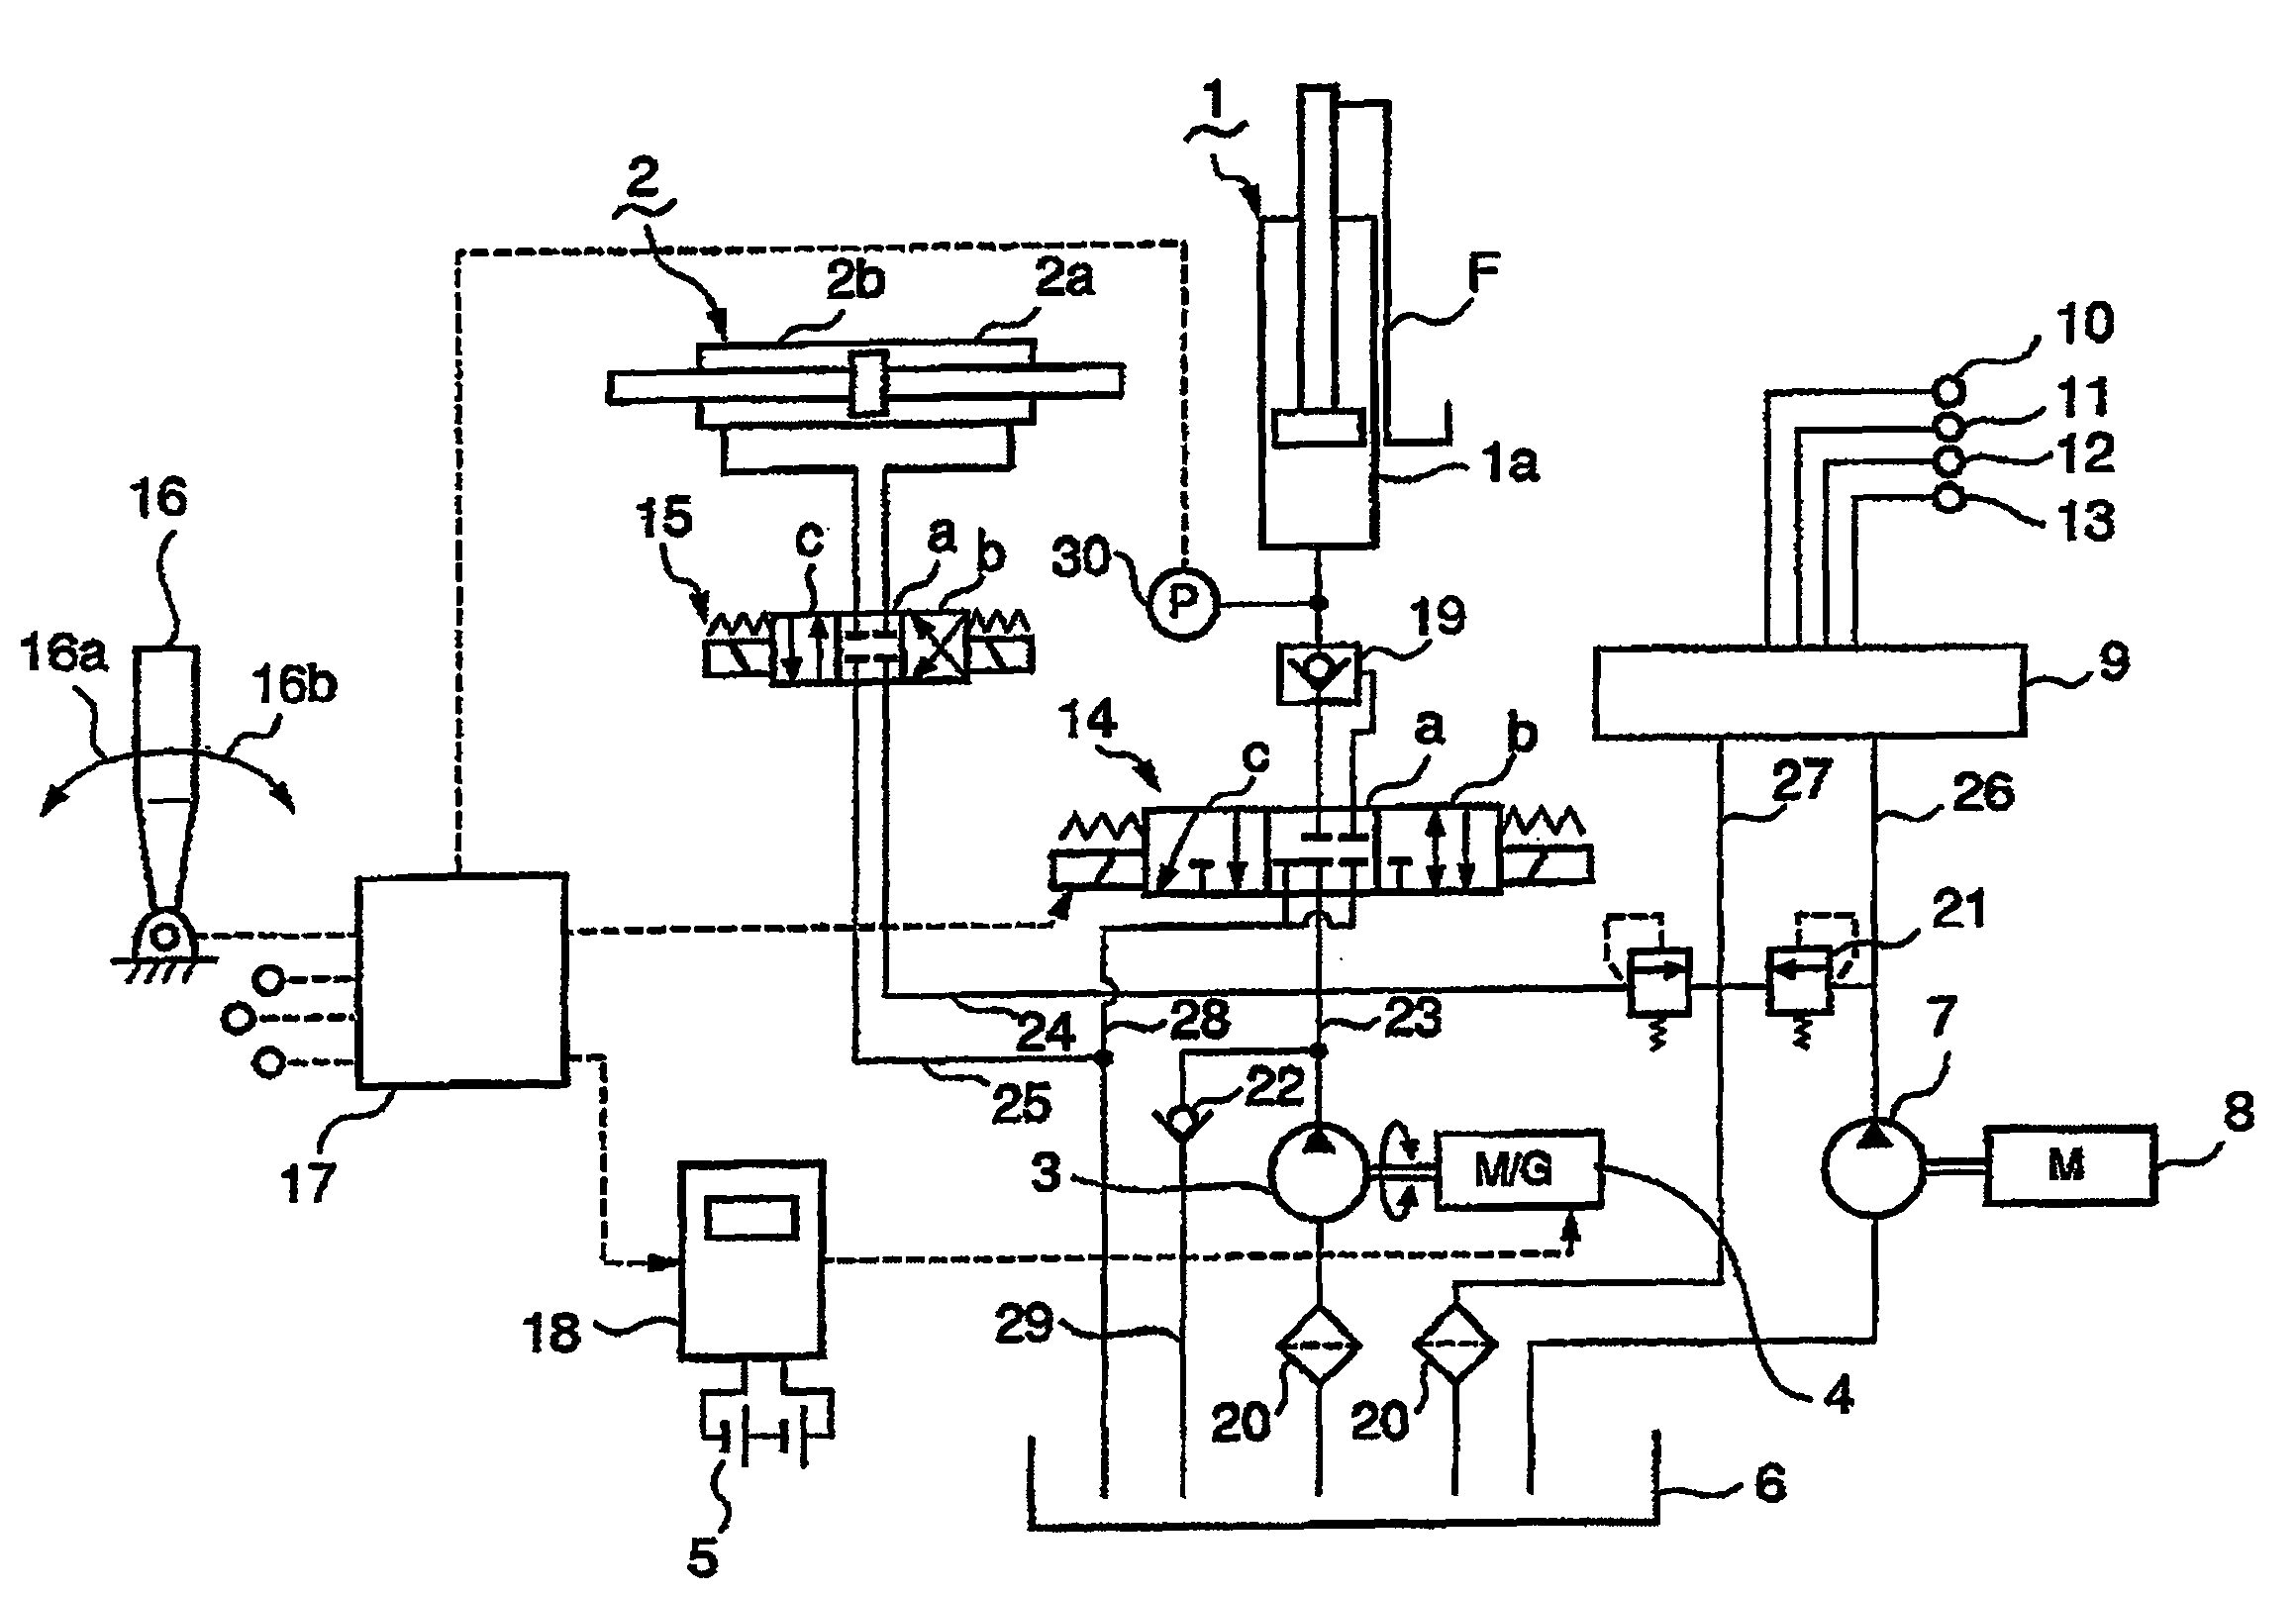 Energy recovering method and system in hydraulic lift device of battery operated industrial trucks